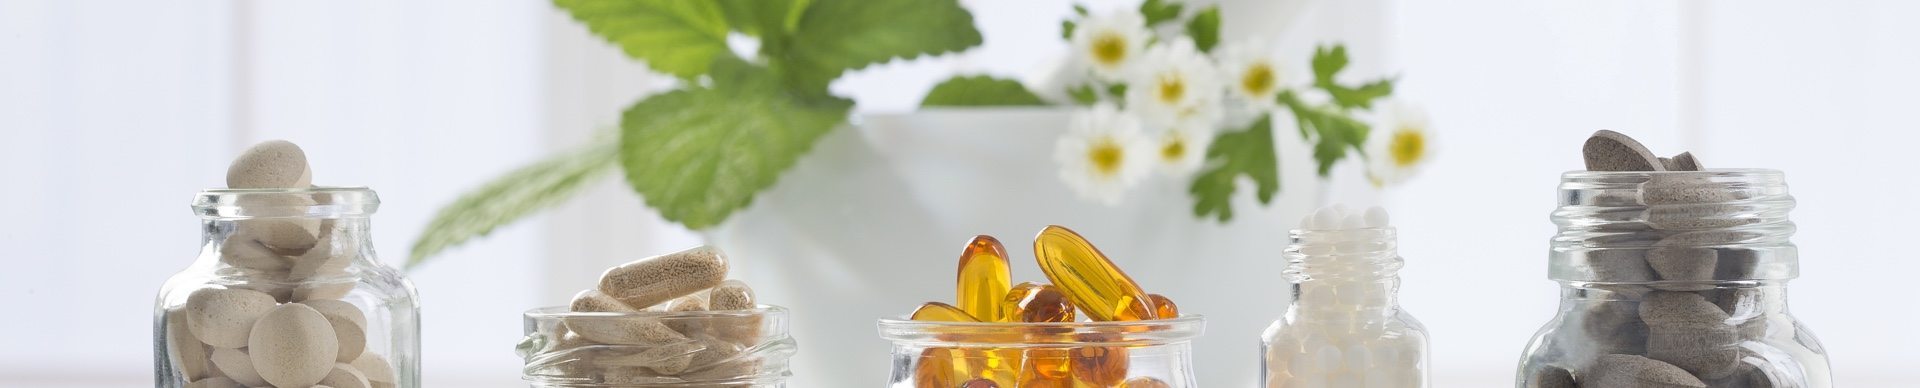 Prescribed Naturopathic Professional Products - When the Cost outweighs the Benefit